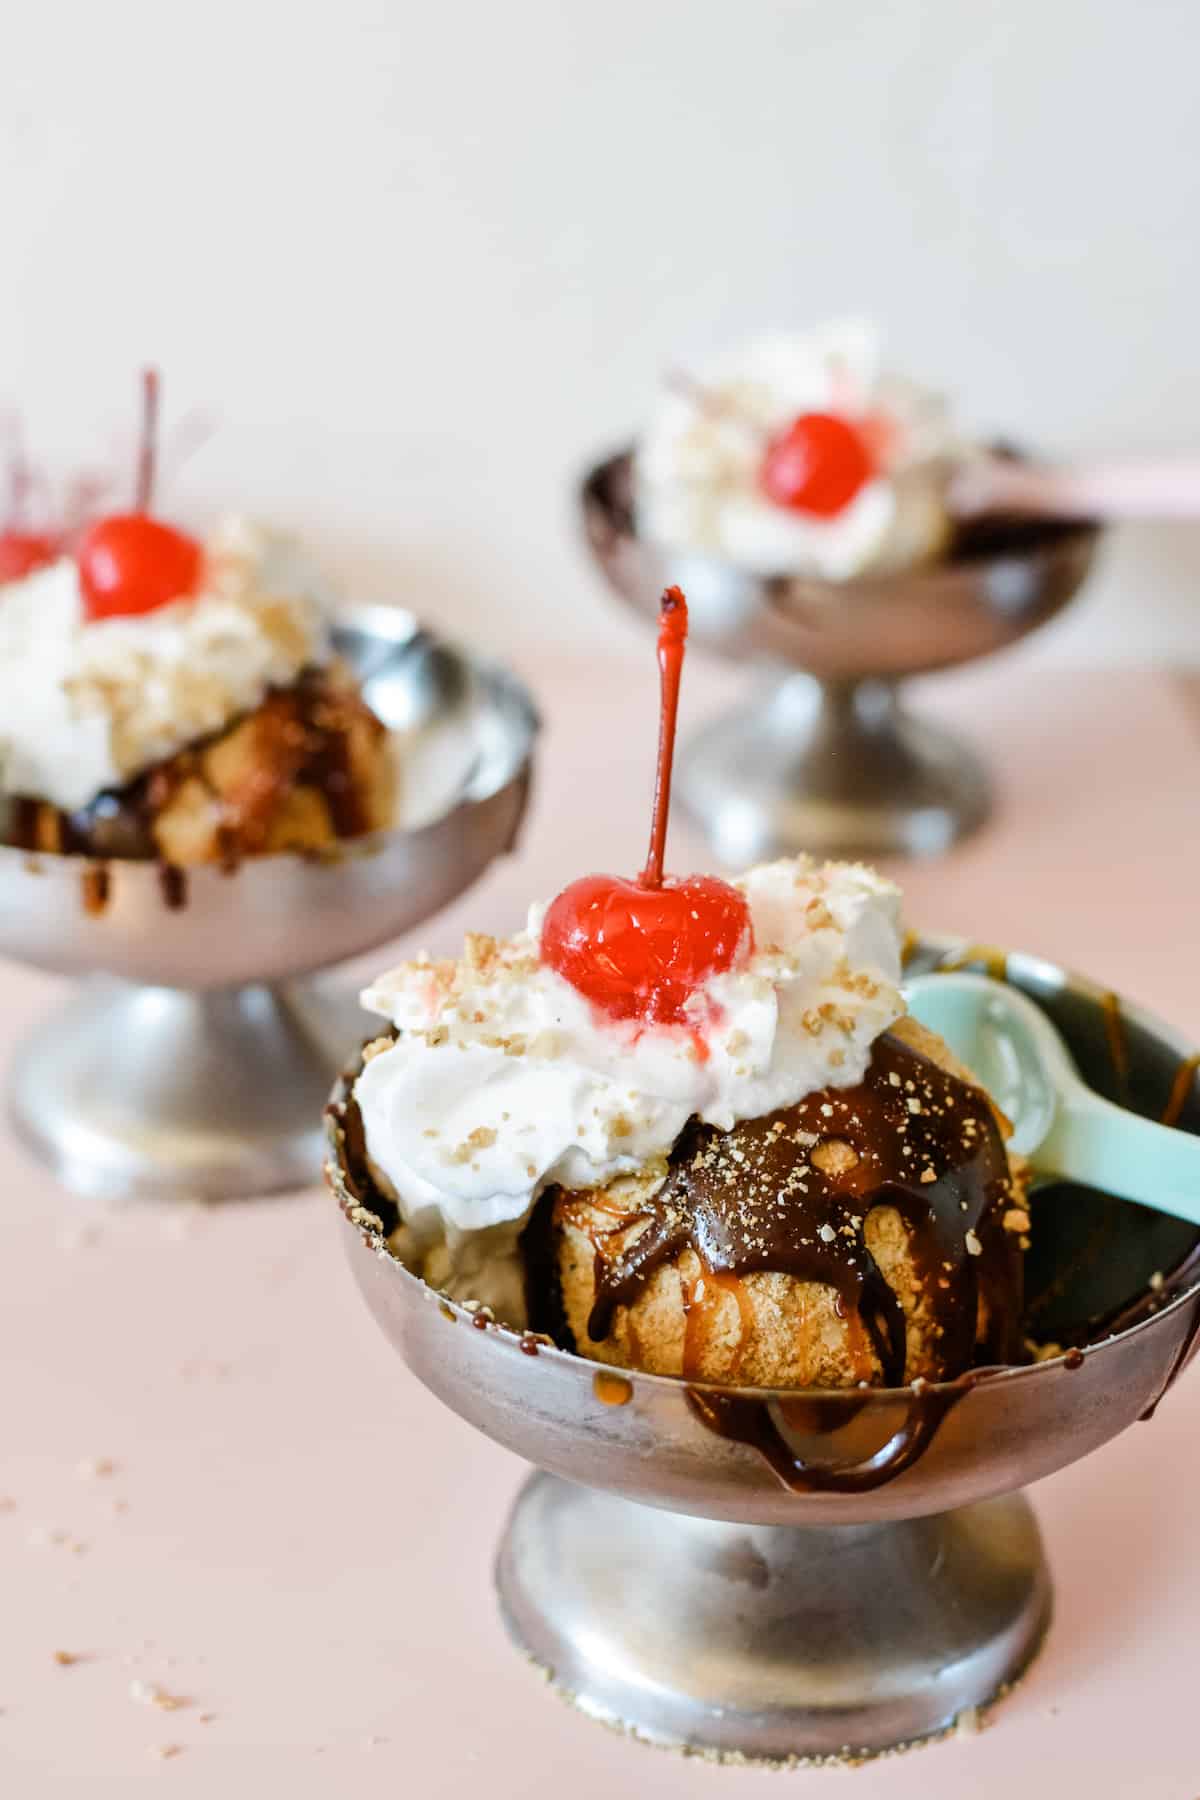 This simple, easy fried ice cream recipe actually requires no frying at all! Not missing is that golden, crispy, delicious cinnamon coating with flakes of sweetened coconut and creamy ice cream underneath. Can be made gluten-free and / or vegan! #friedicecream #easyfriedicecream #icecreamrecipe #easydessertrecipe